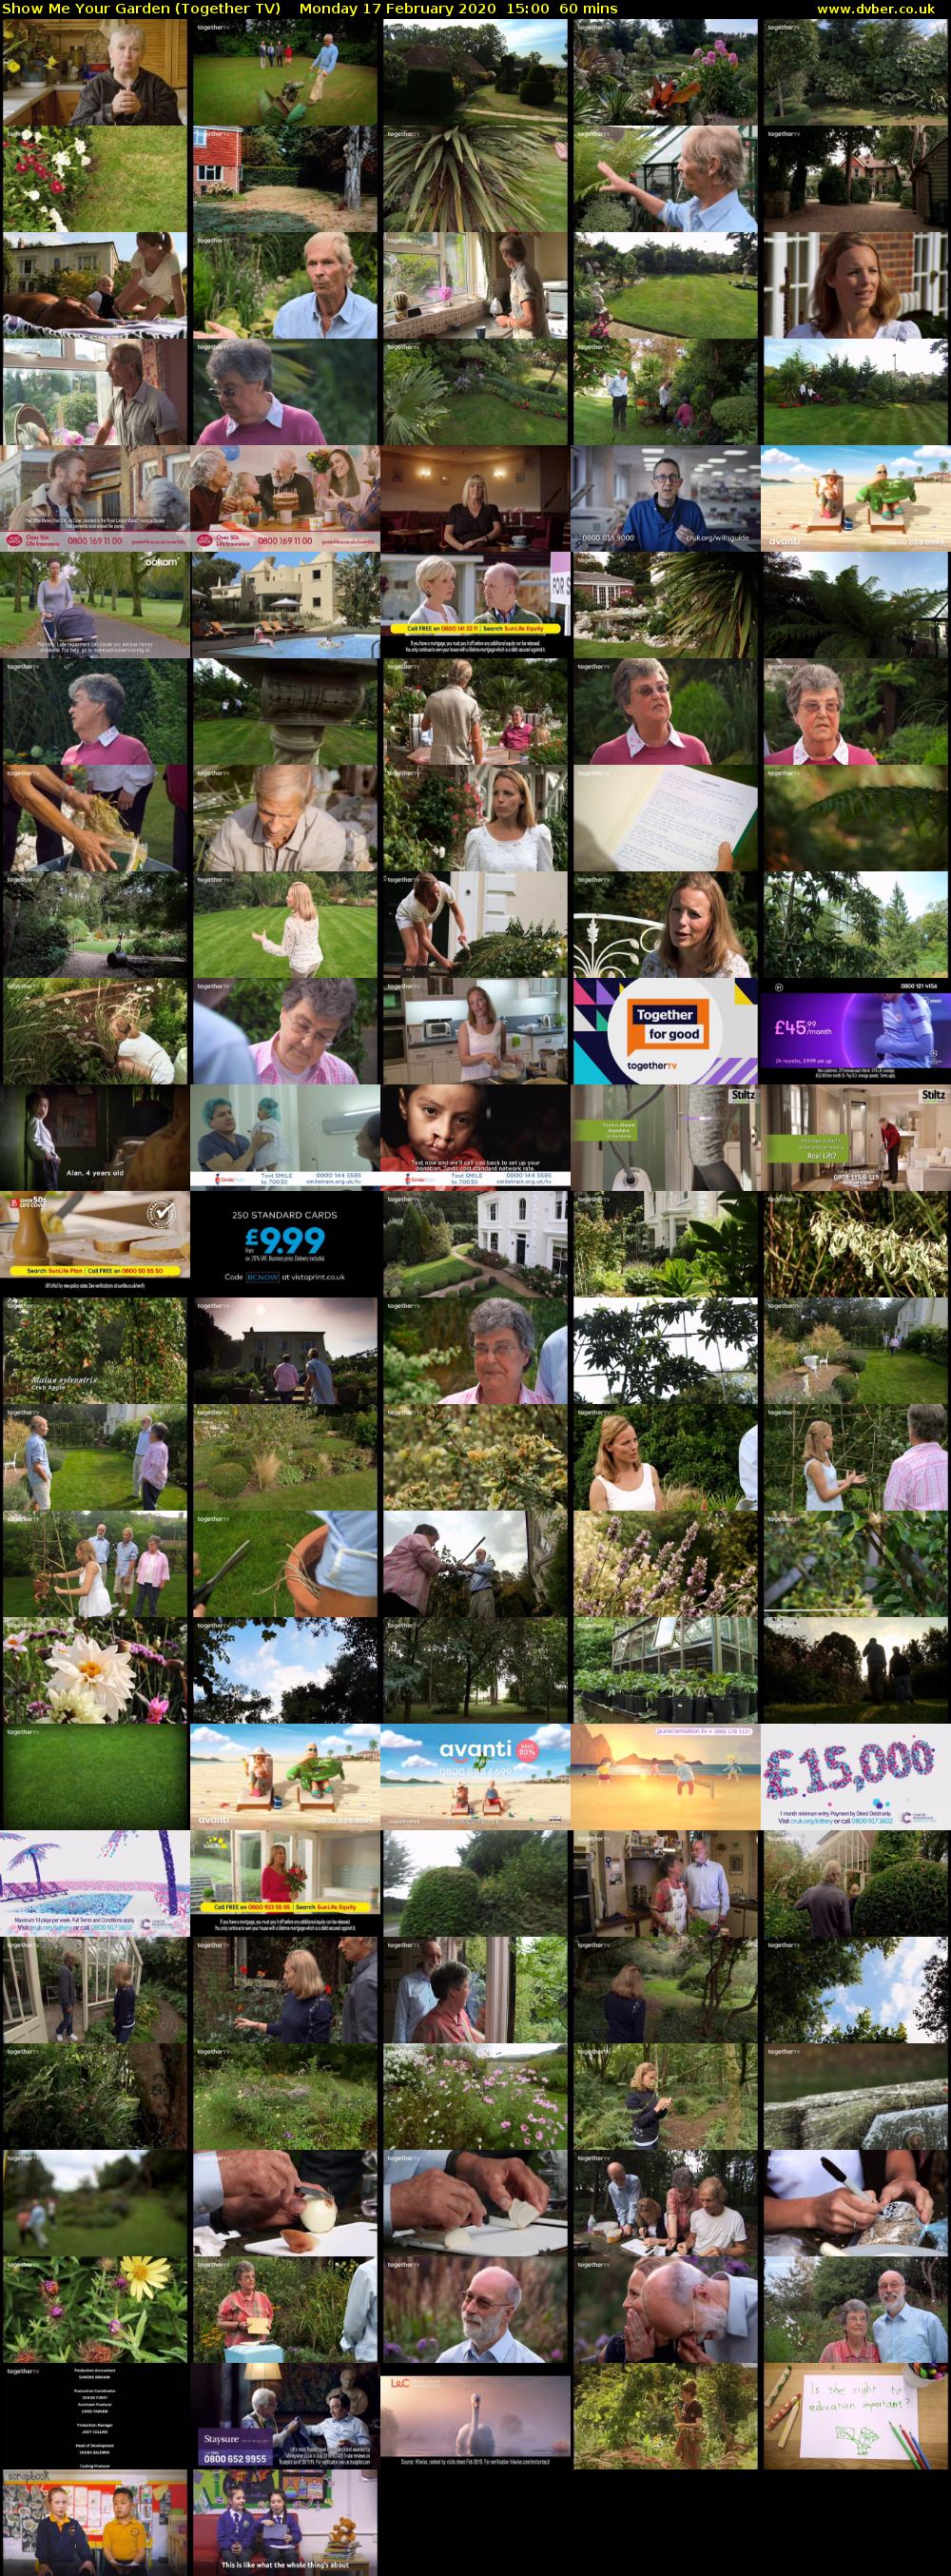 Show Me Your Garden (Together TV) Monday 17 February 2020 15:00 - 16:00